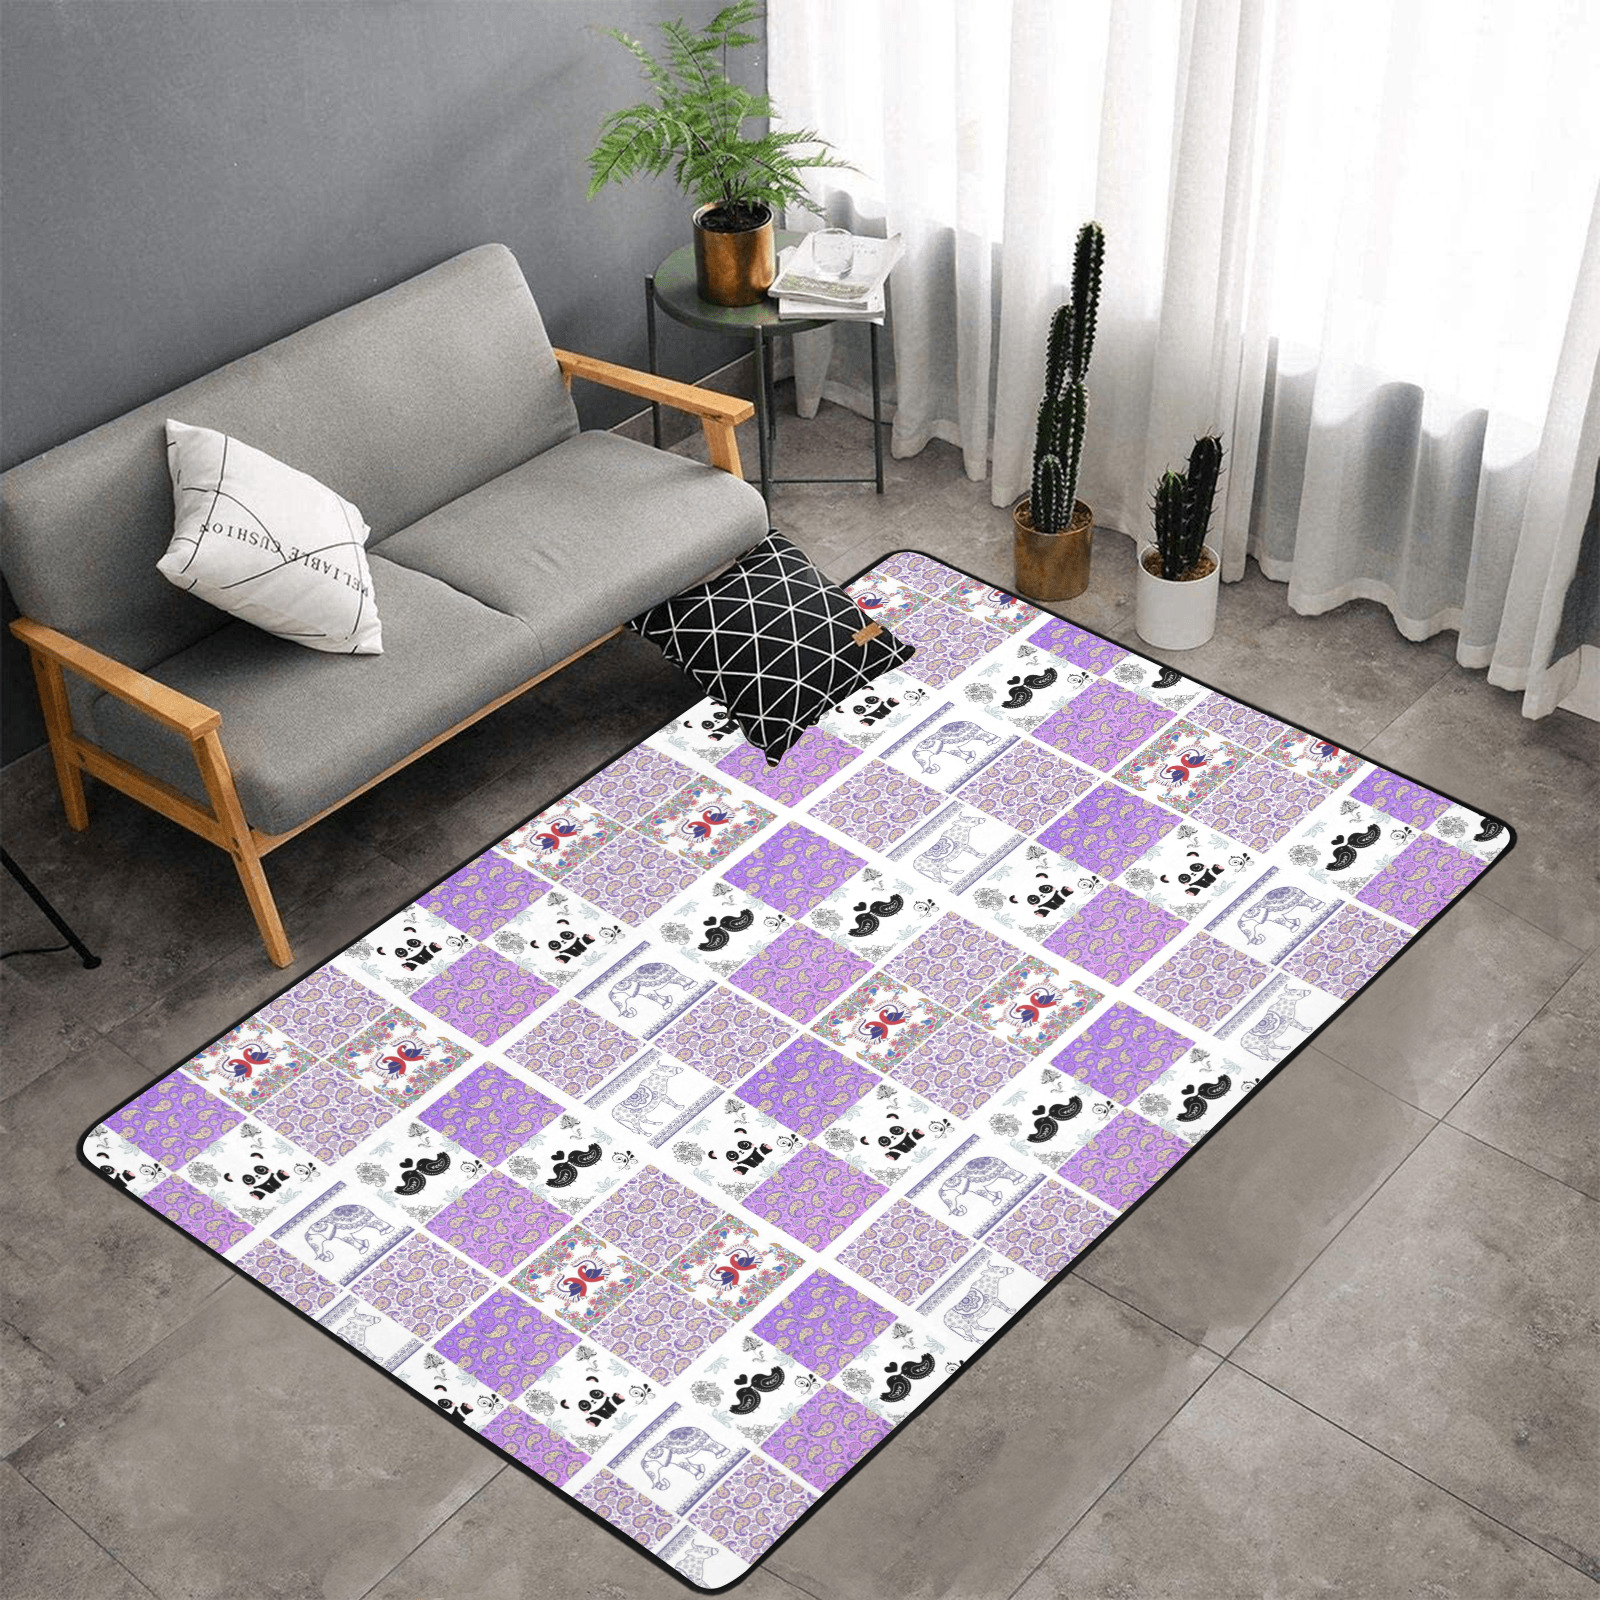 Purple Paisley Birds and Animals Patchwork Design Area Rug with Black Binding 7'x5'